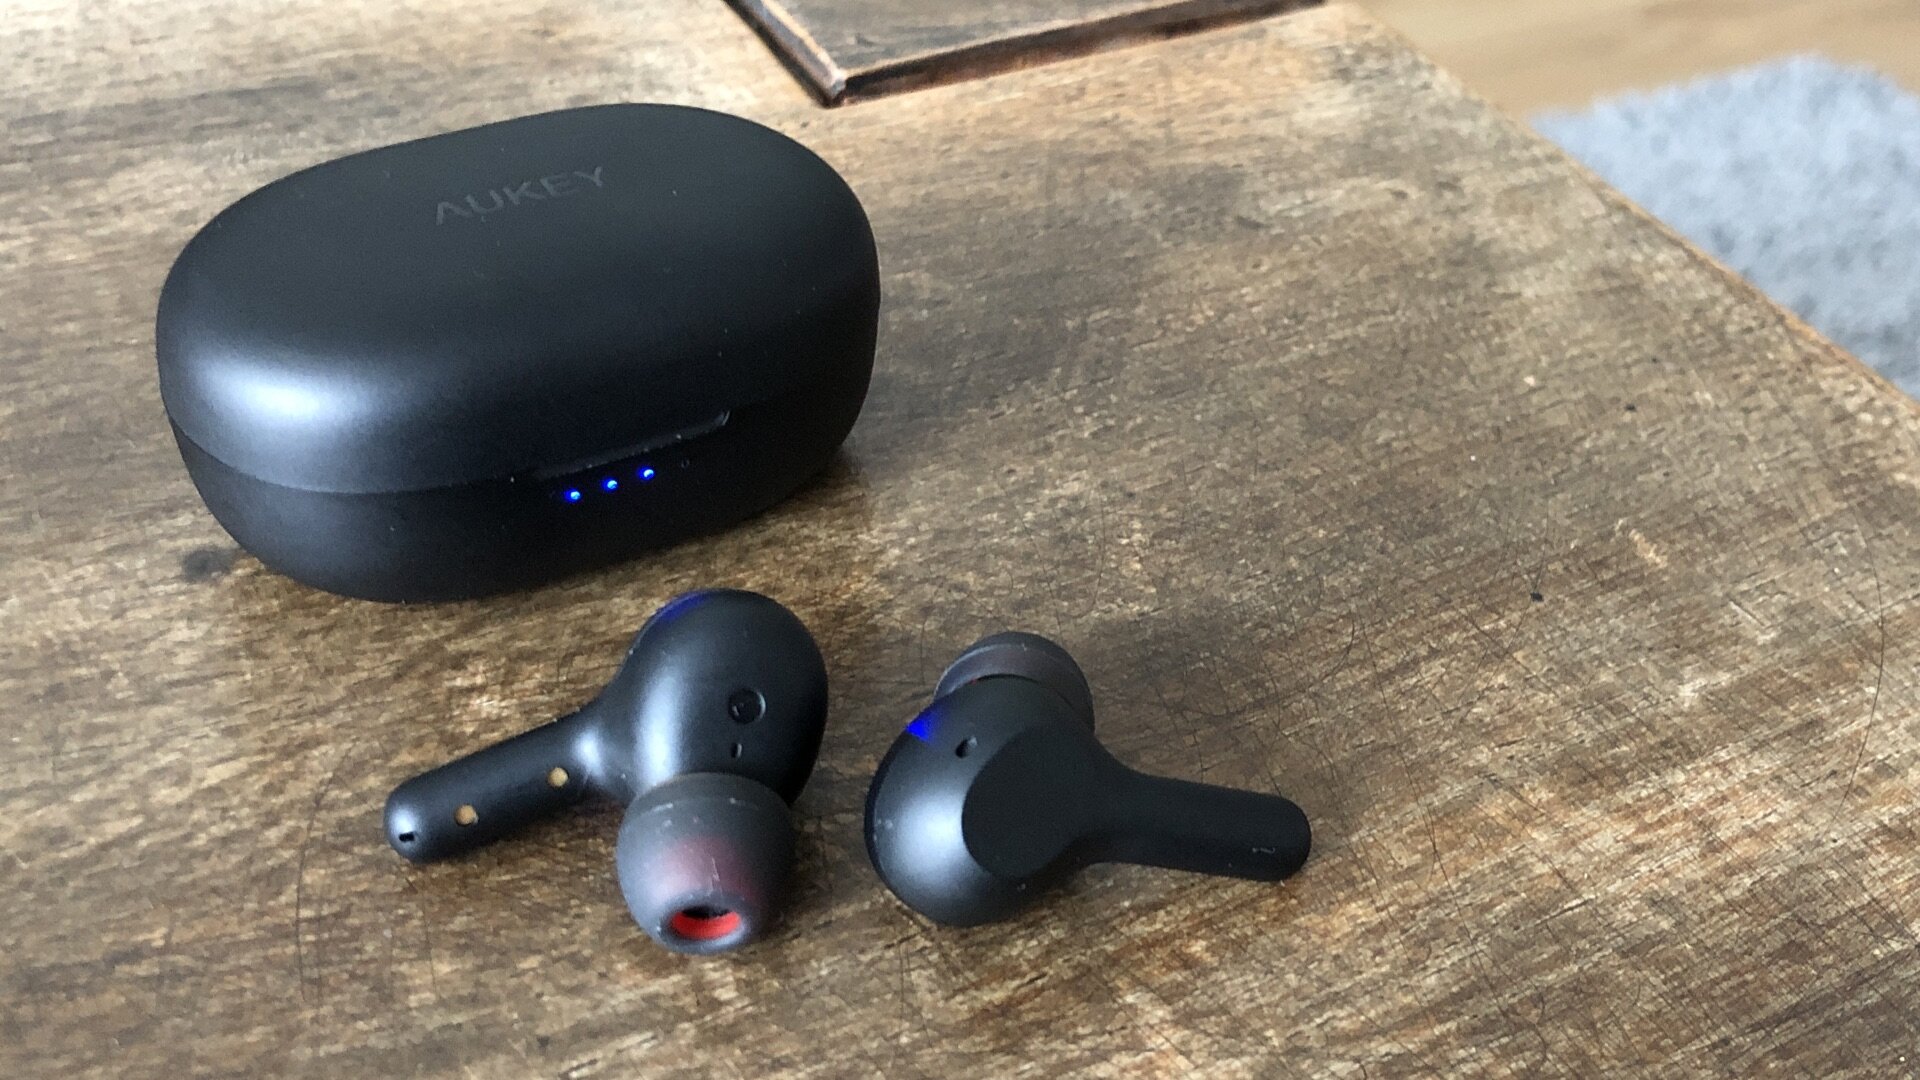 Aukey EP-T25 review: Is the loudest cheap TWS good?